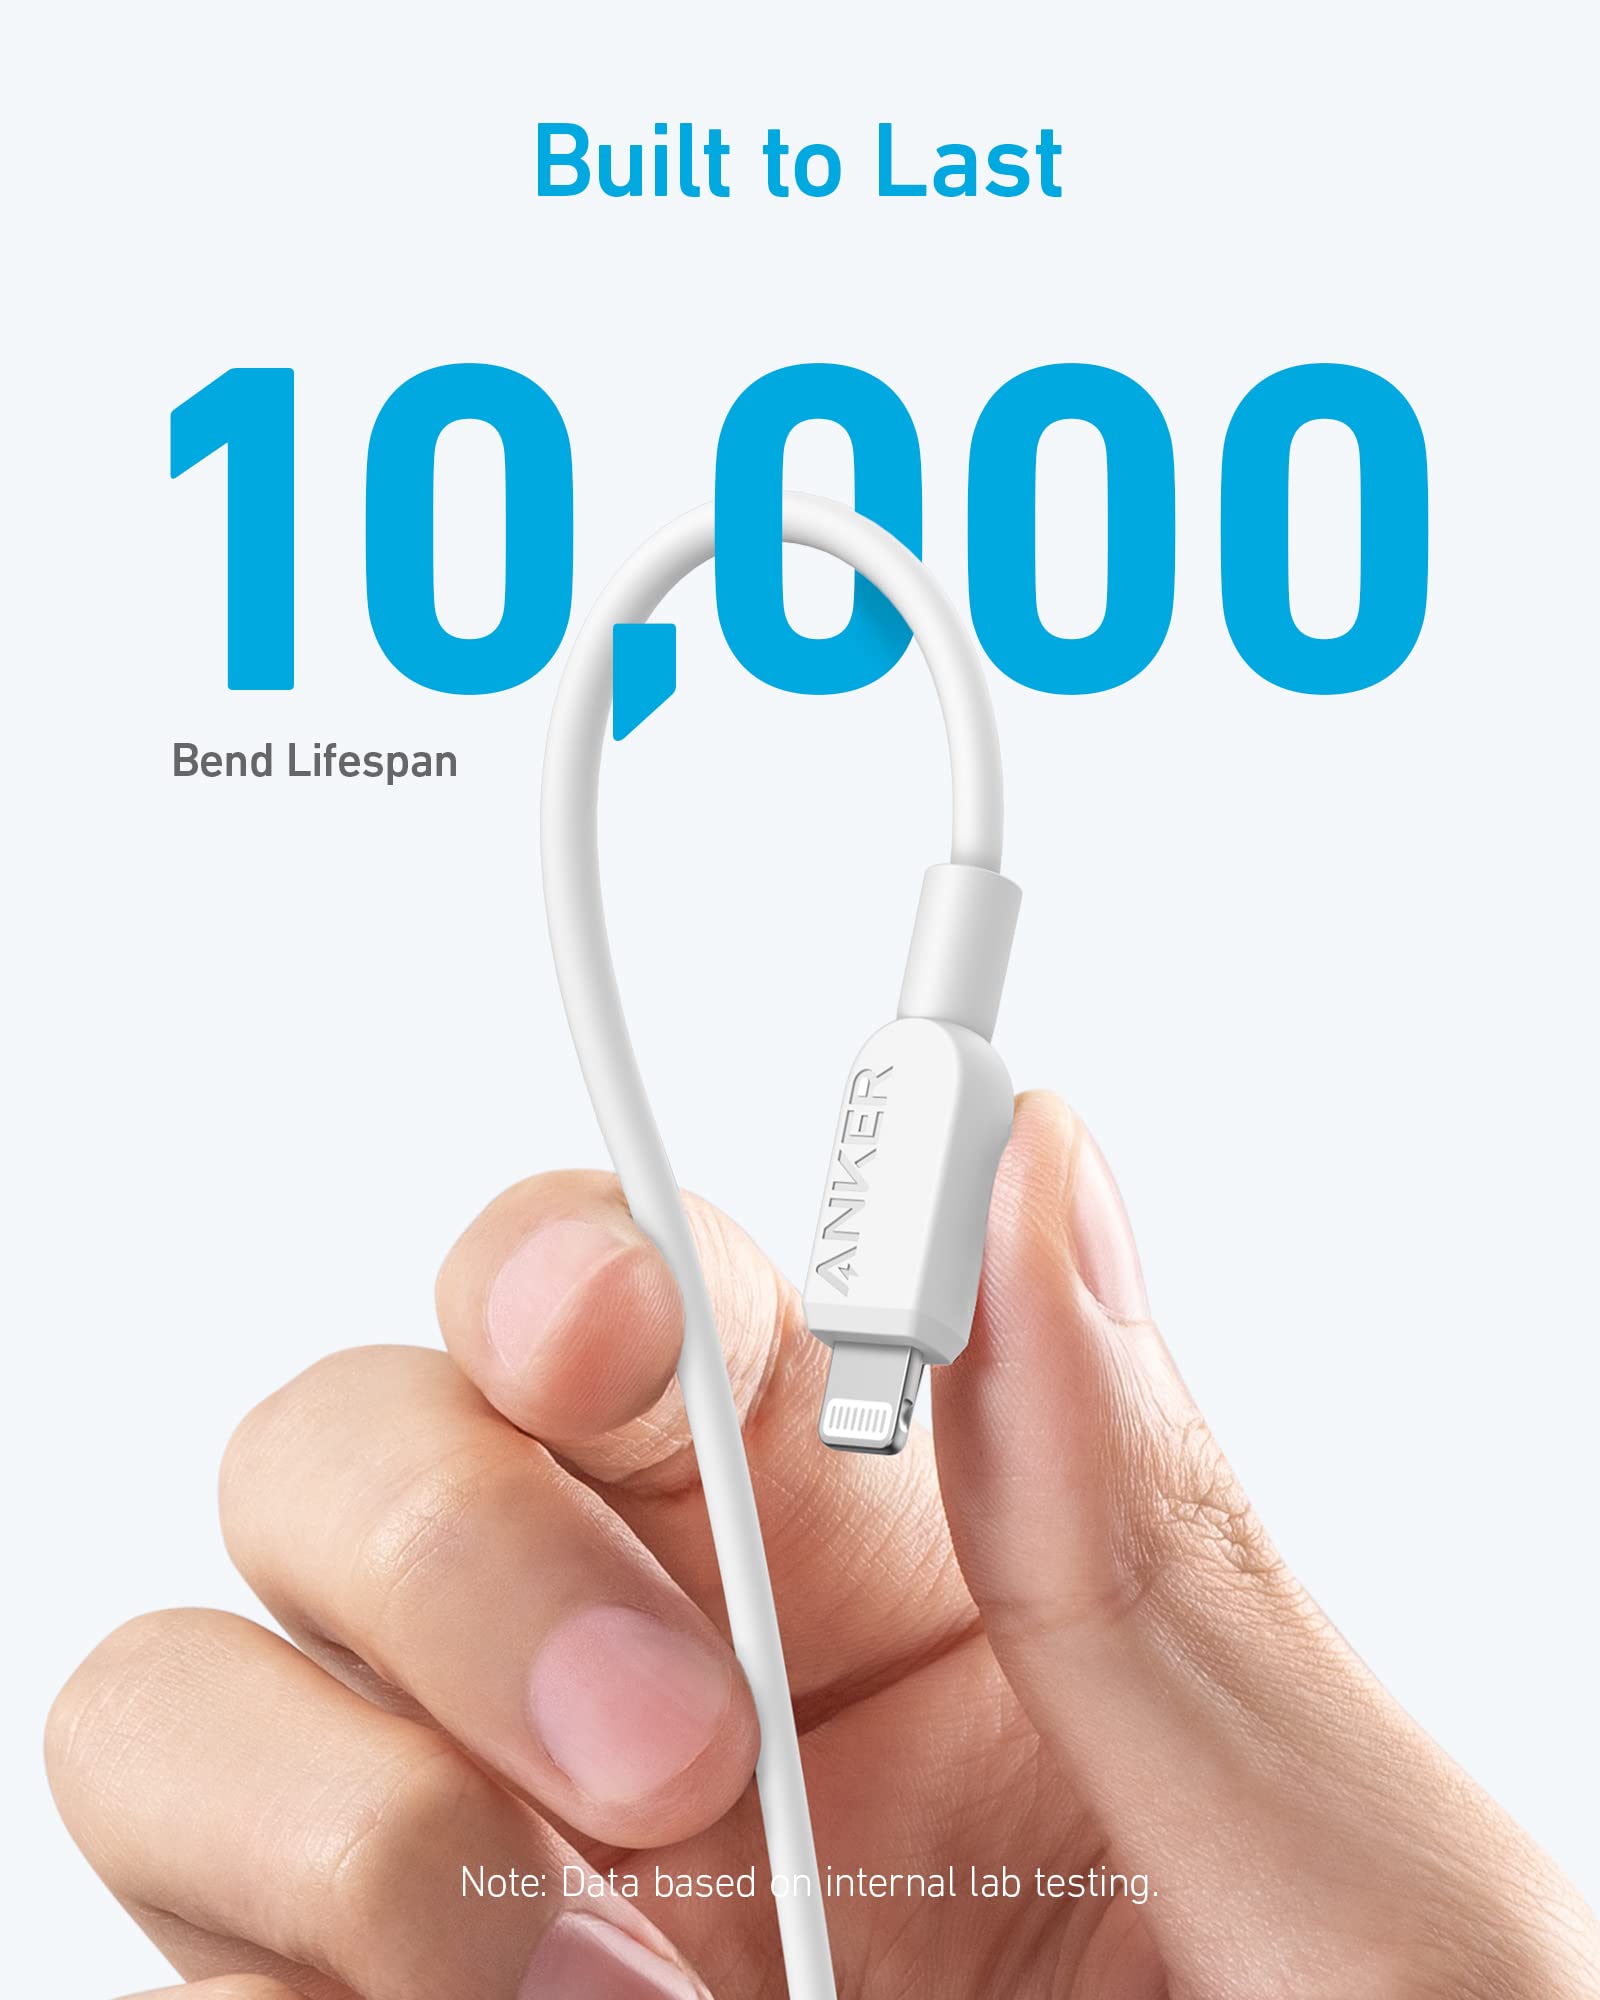 Cables - Anker US